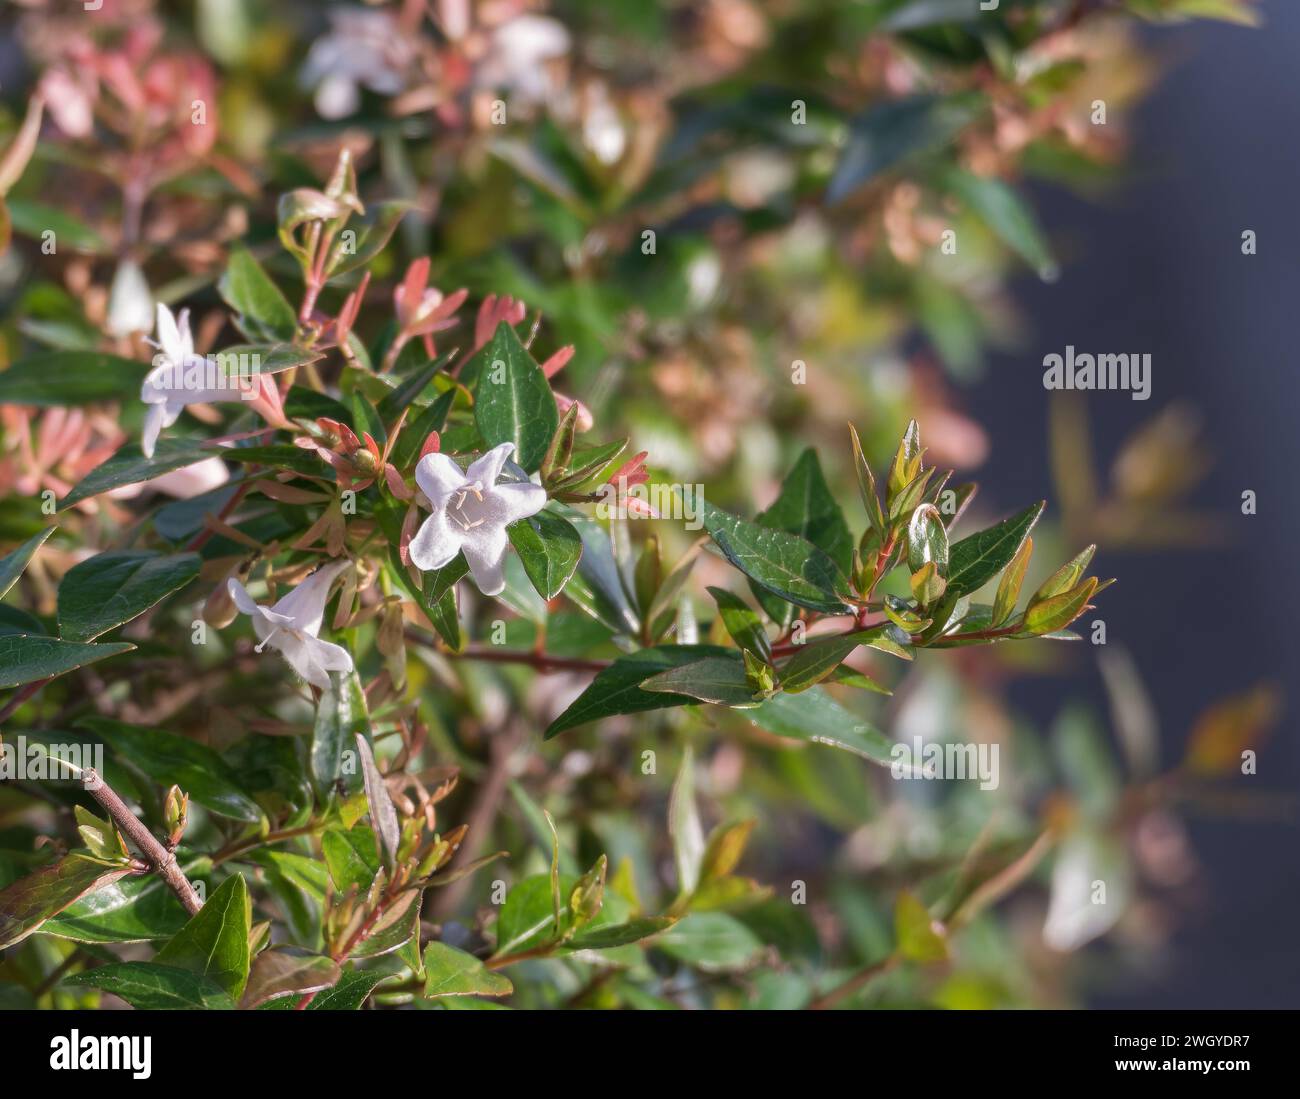 Glossy Abelia flower blooming in the sun outdoors Stock Photo